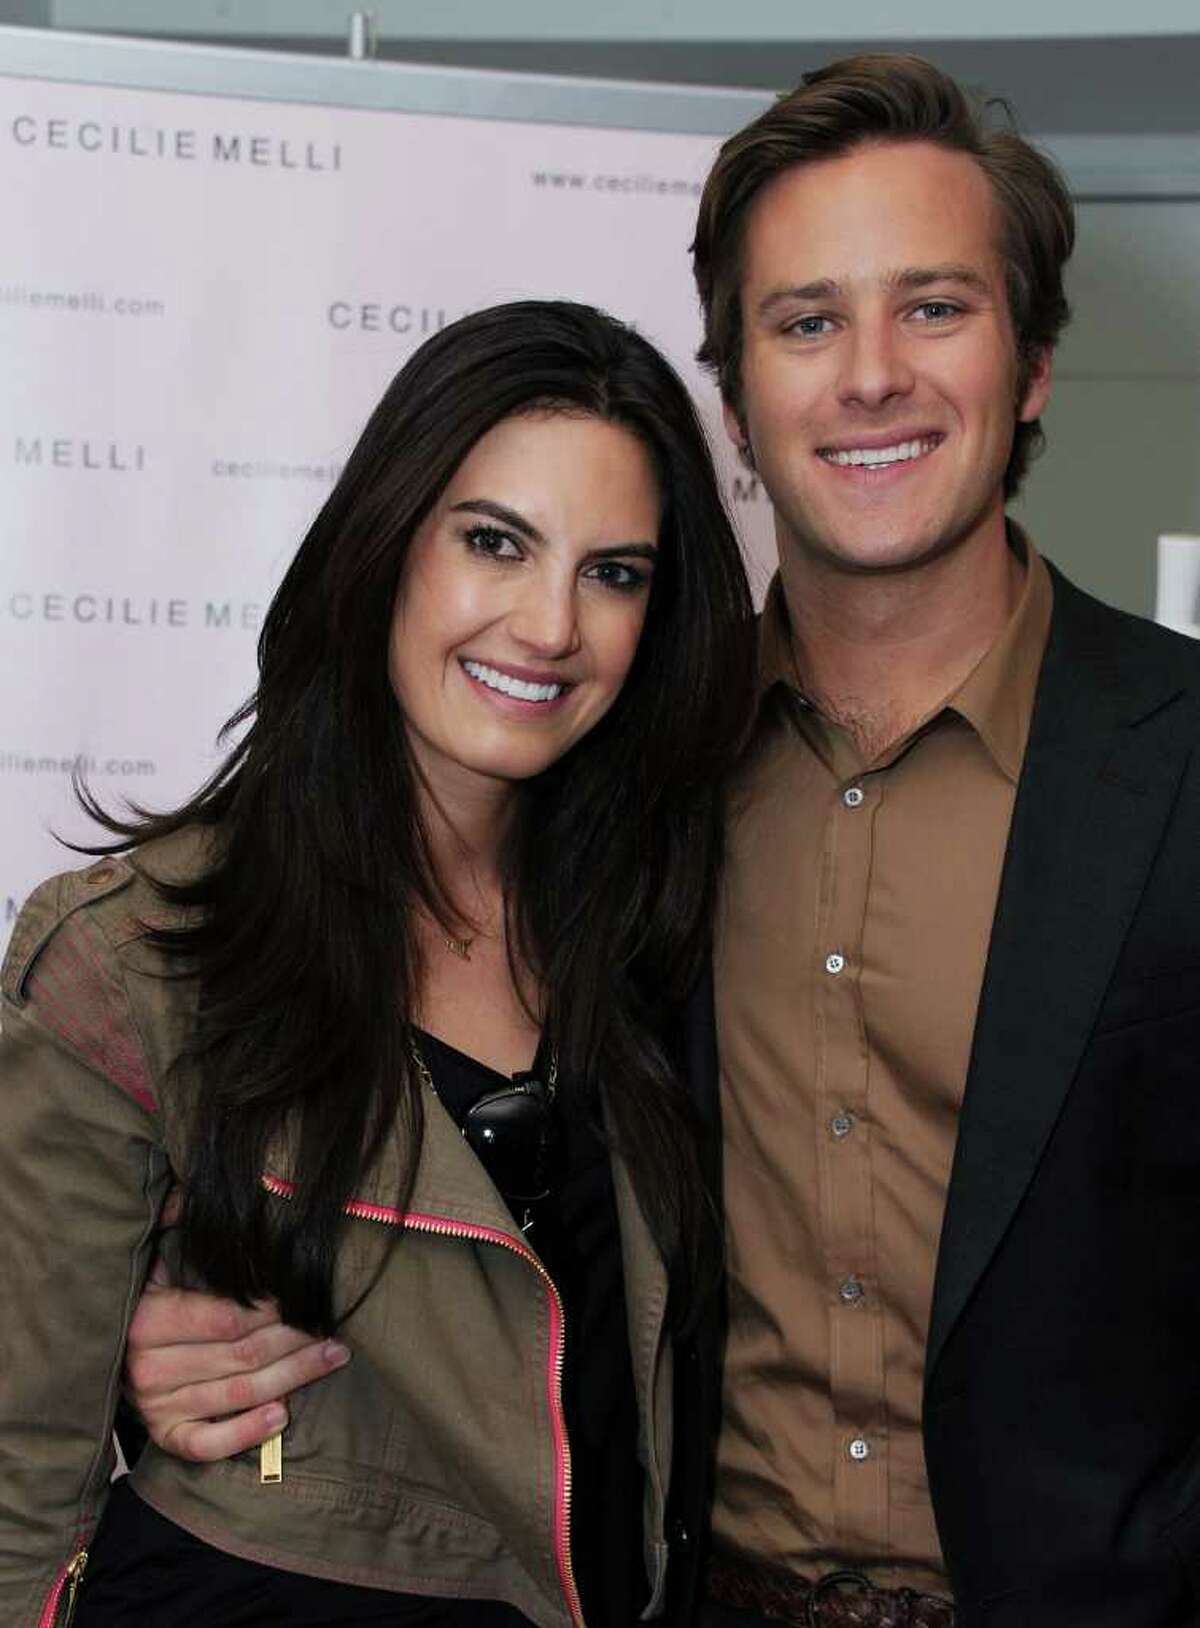 E! News' Elizabeth Chambers and husband, actor Armie Hammer, will be very "hands-on" at their Broadway Street bakery.